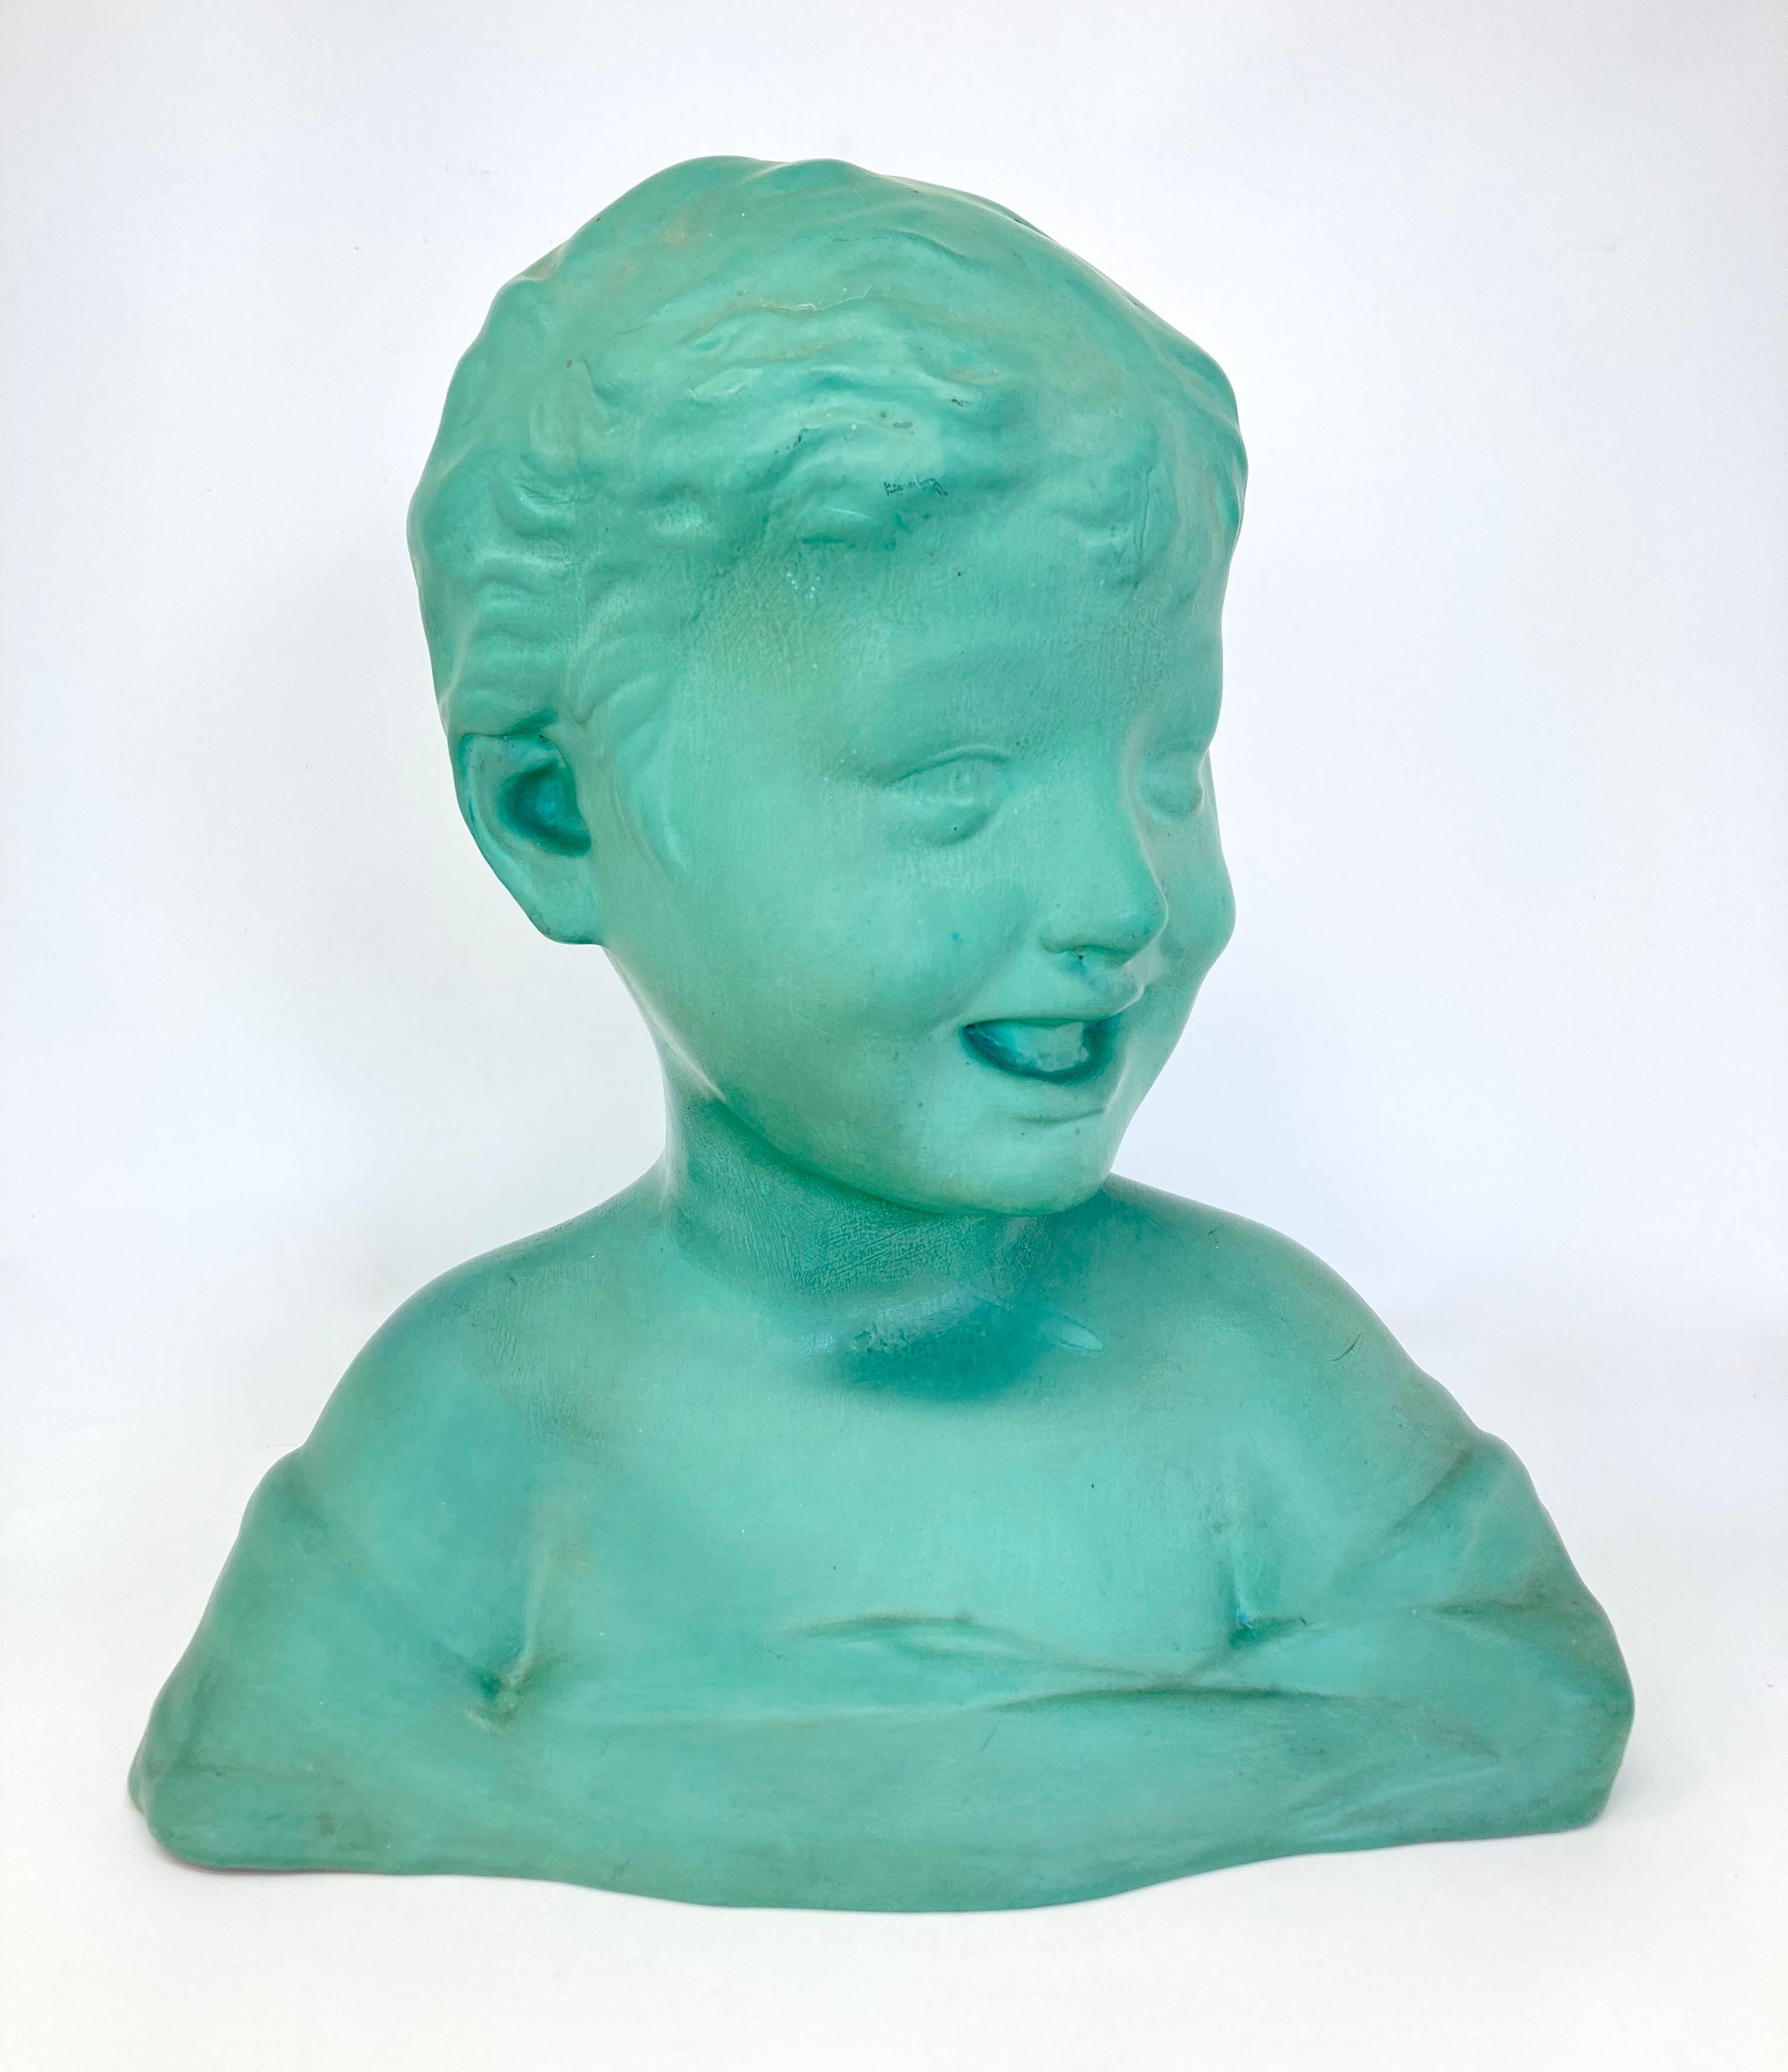 A lovely terracotta bust of a child made by the famous french pottery producer, Saint-Clément. Undated but most likely from the 1920/30s, the bust was part of the 